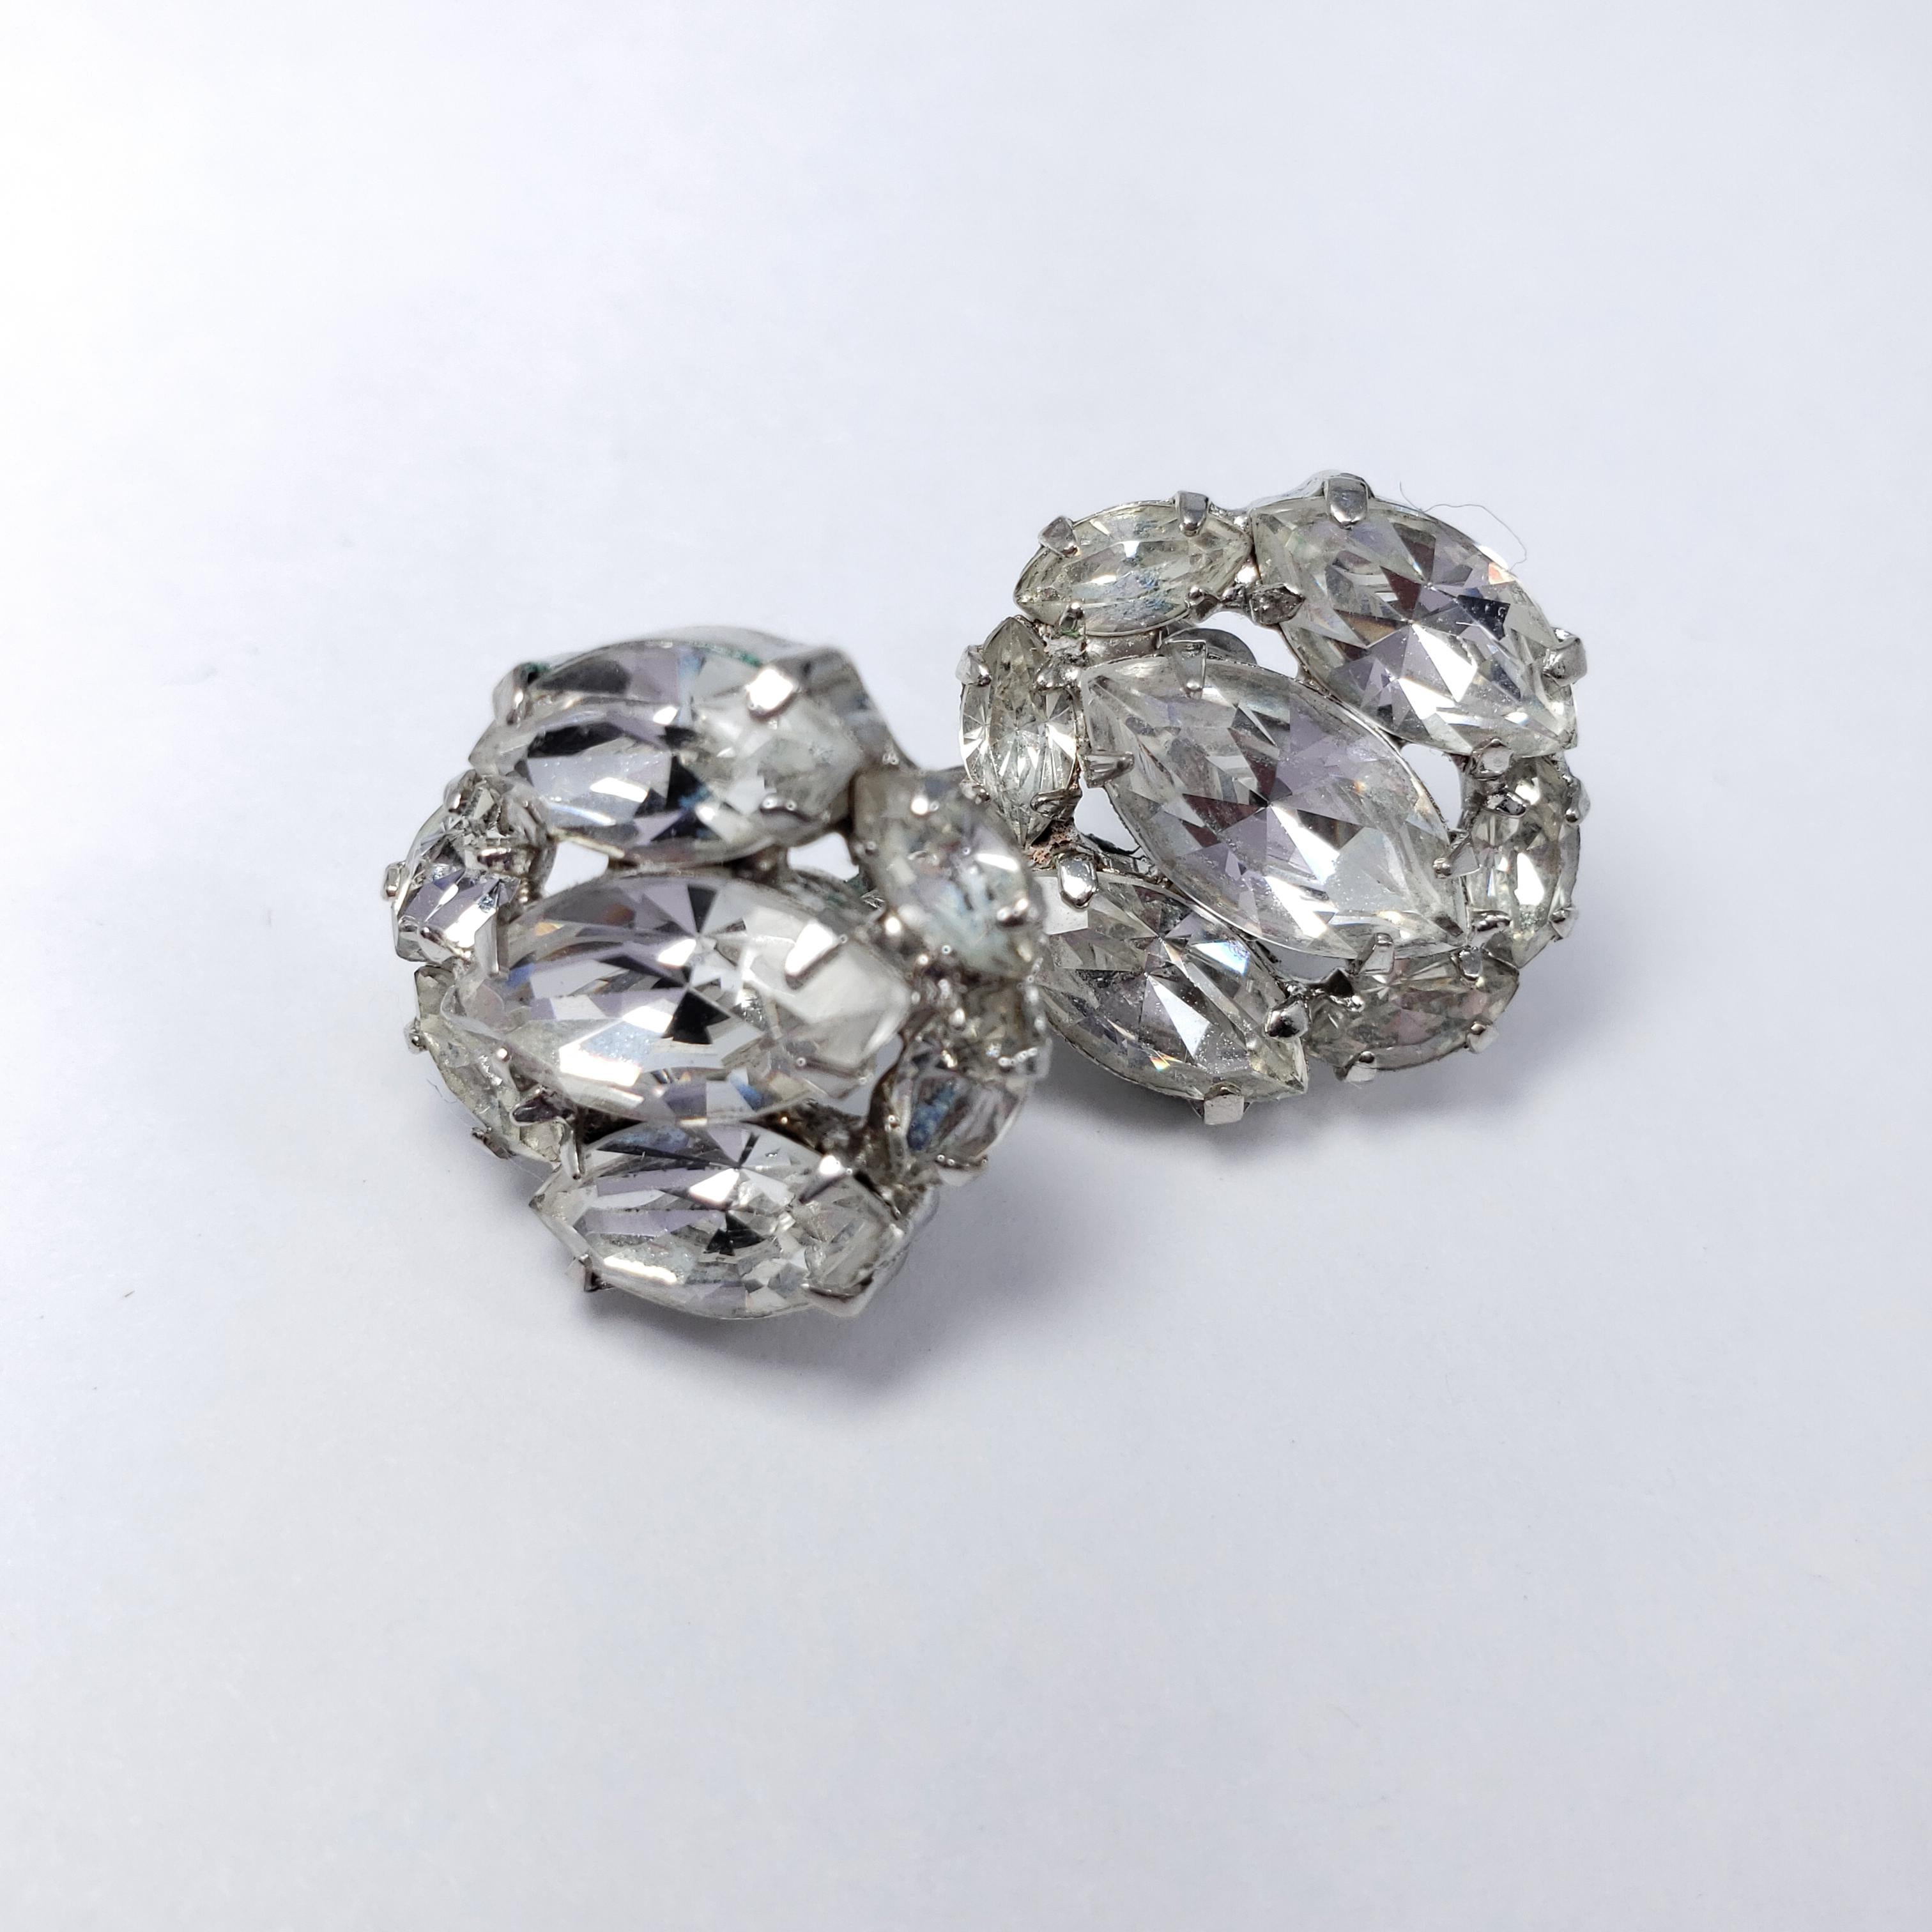 A pair of silvertone earrings with glittering clear crystals. A perfect touch to any style!

Screw back hardware